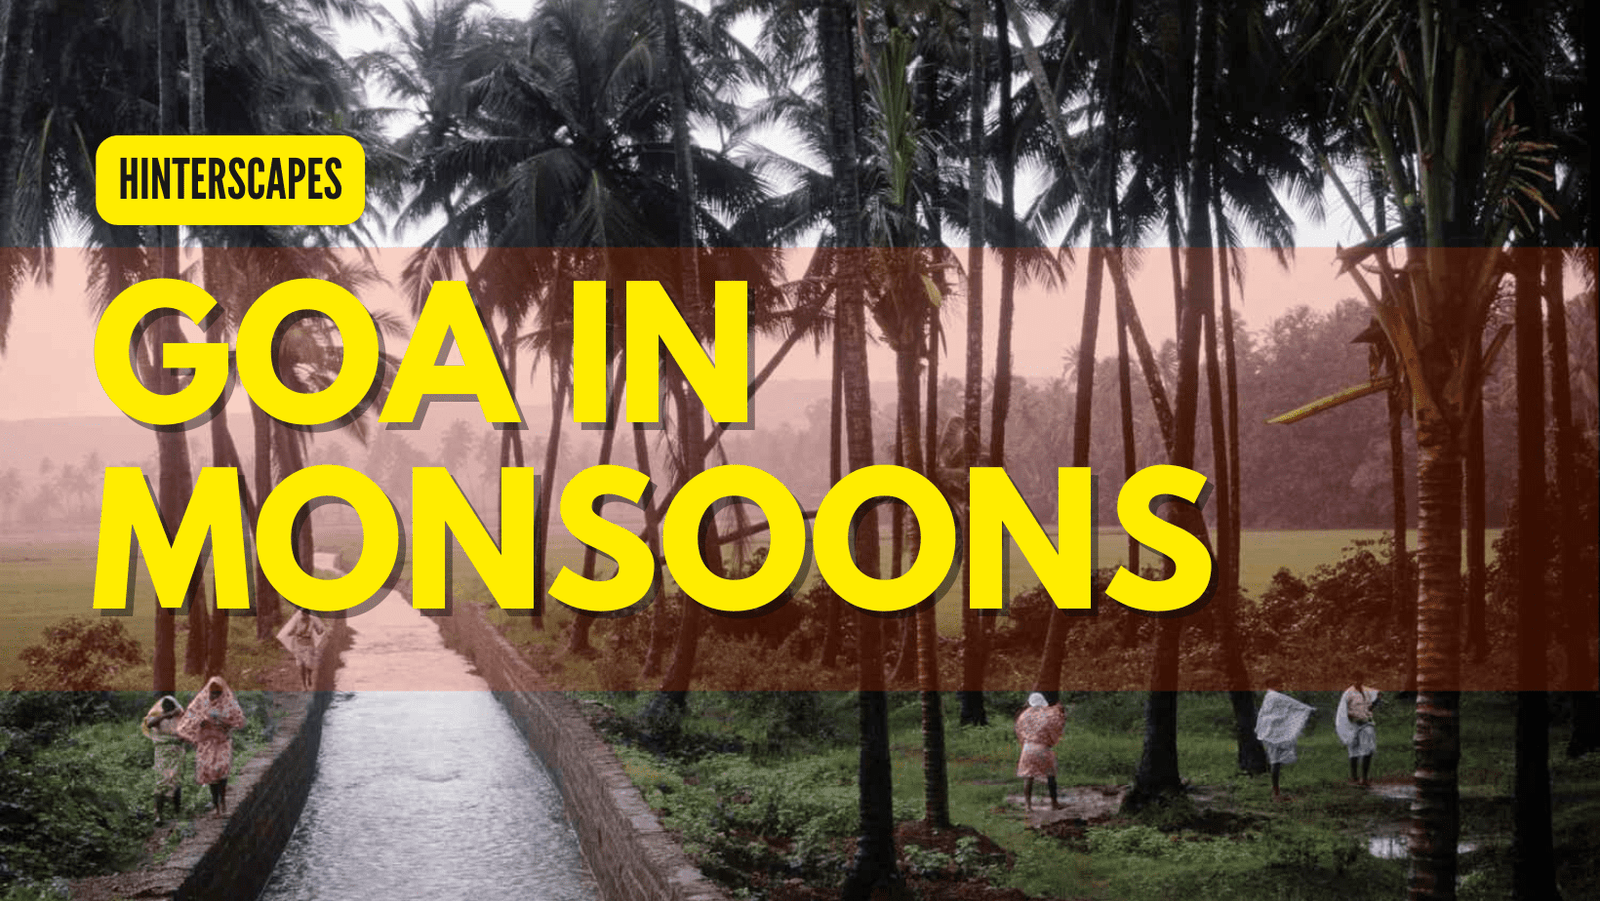 What to do in Goa during Monsoons?